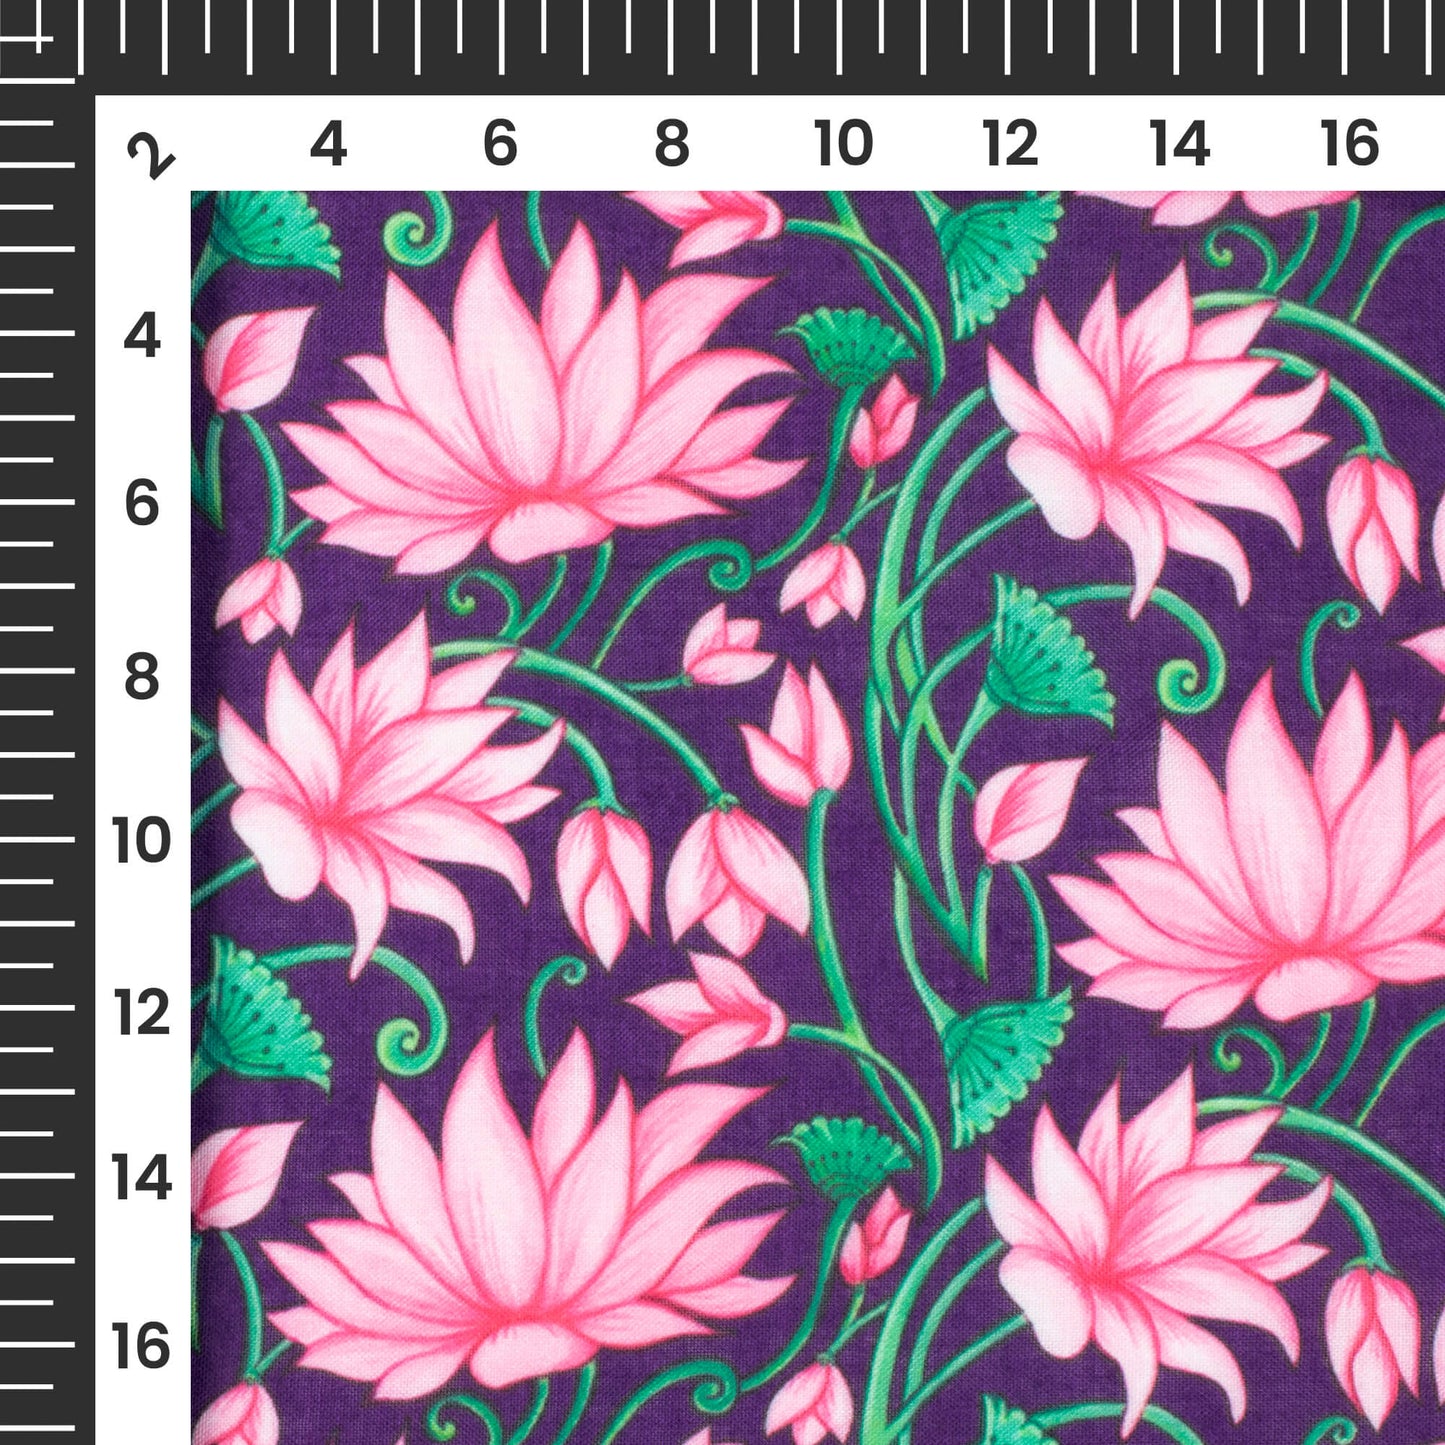 Violet Purple And Taffy Pink Pichwaii Pattern Digital Print Poly Cambric Fabric